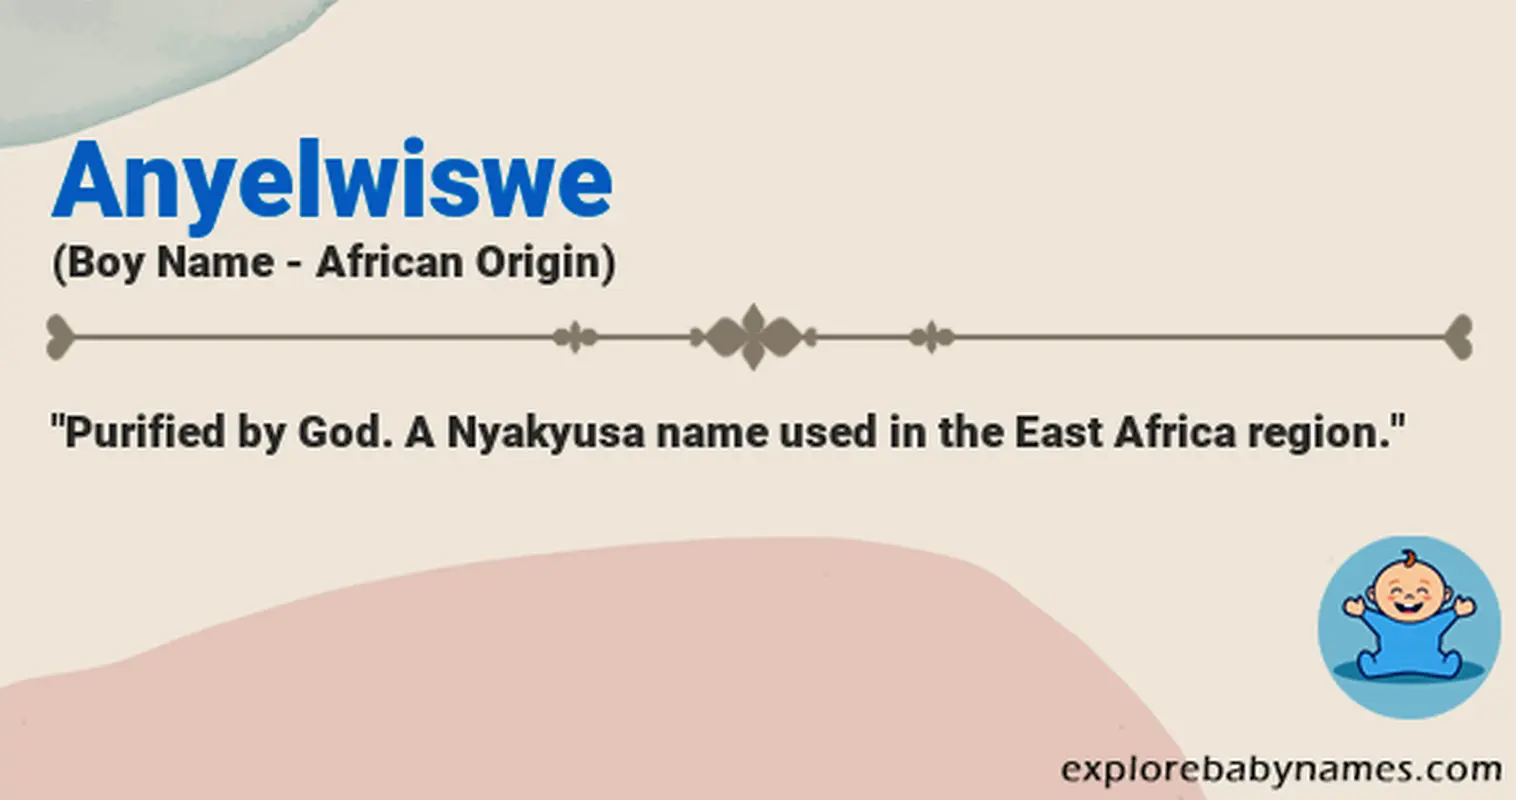 Meaning of Anyelwiswe